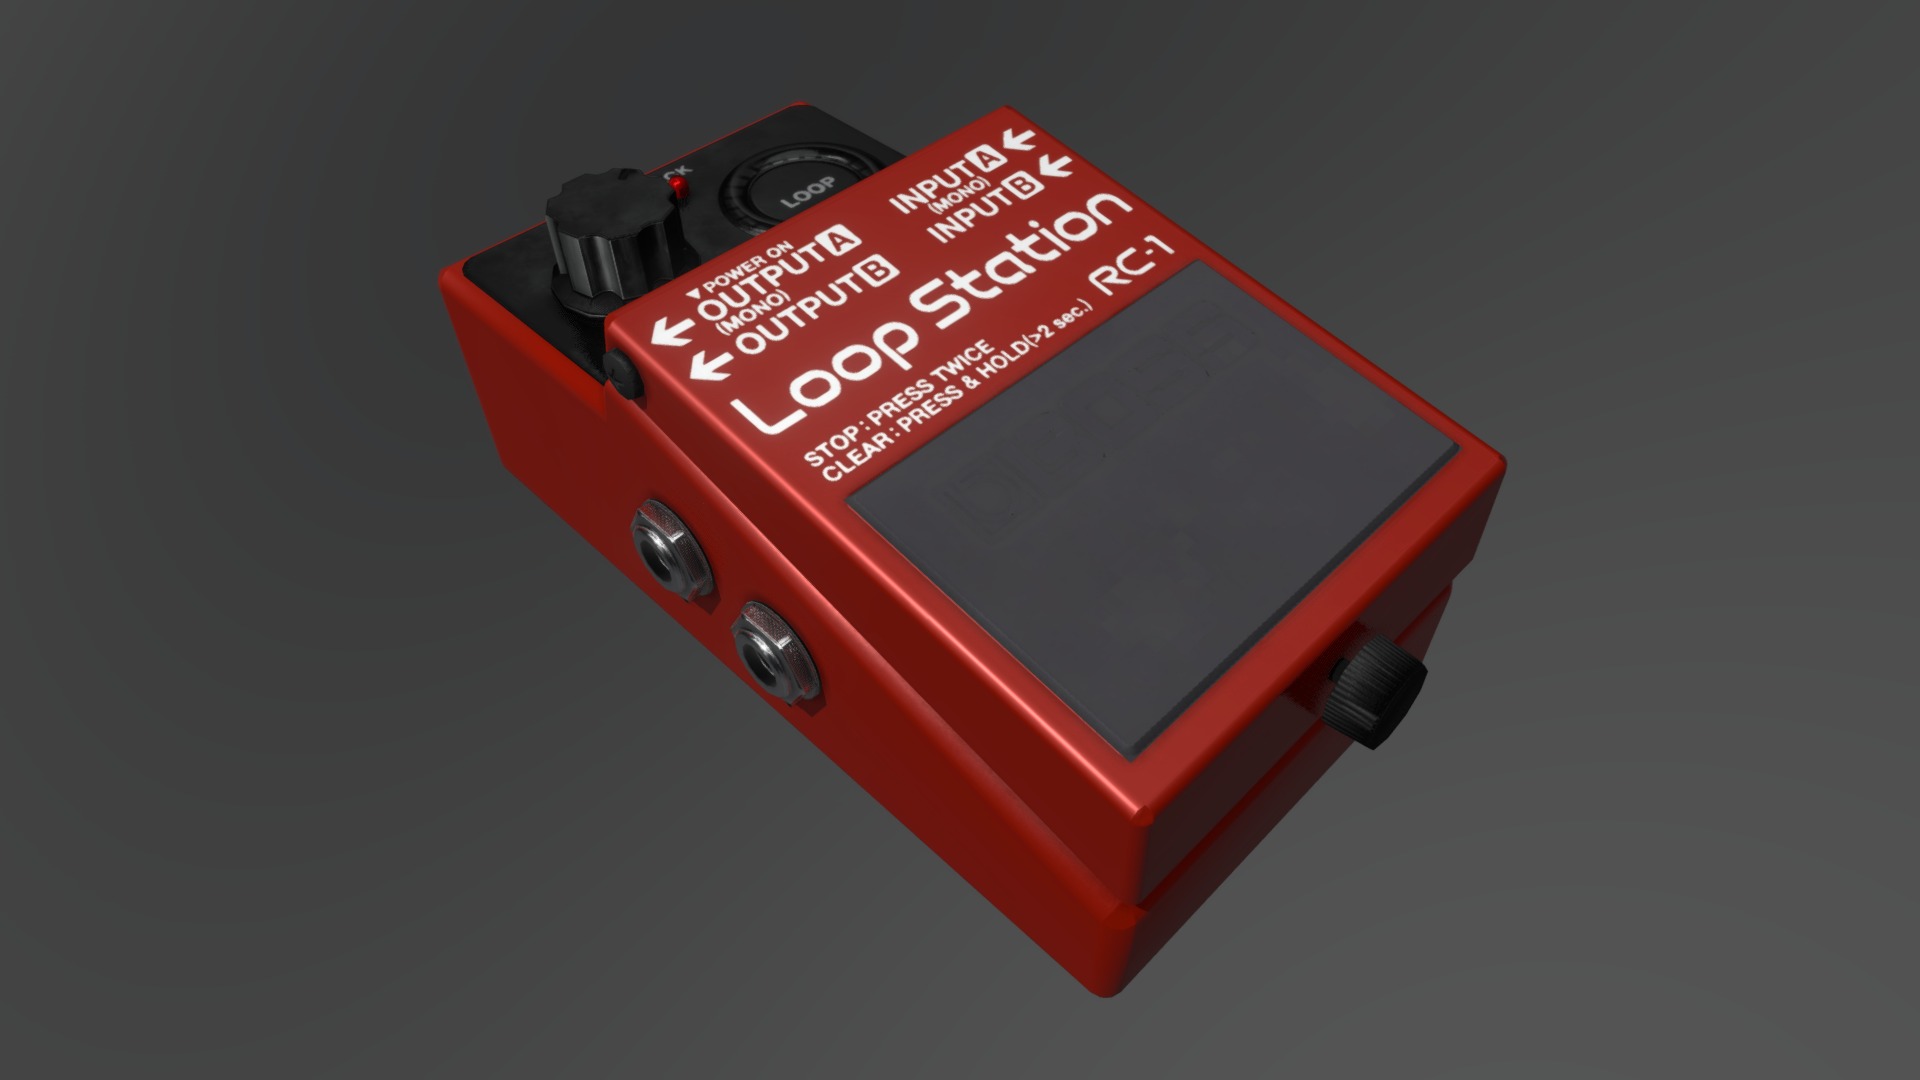 3D model BOSS Looper RC-1 Pedal - This is a 3D model of the BOSS Looper RC-1 Pedal. The 3D model is about a red and black electronic device.